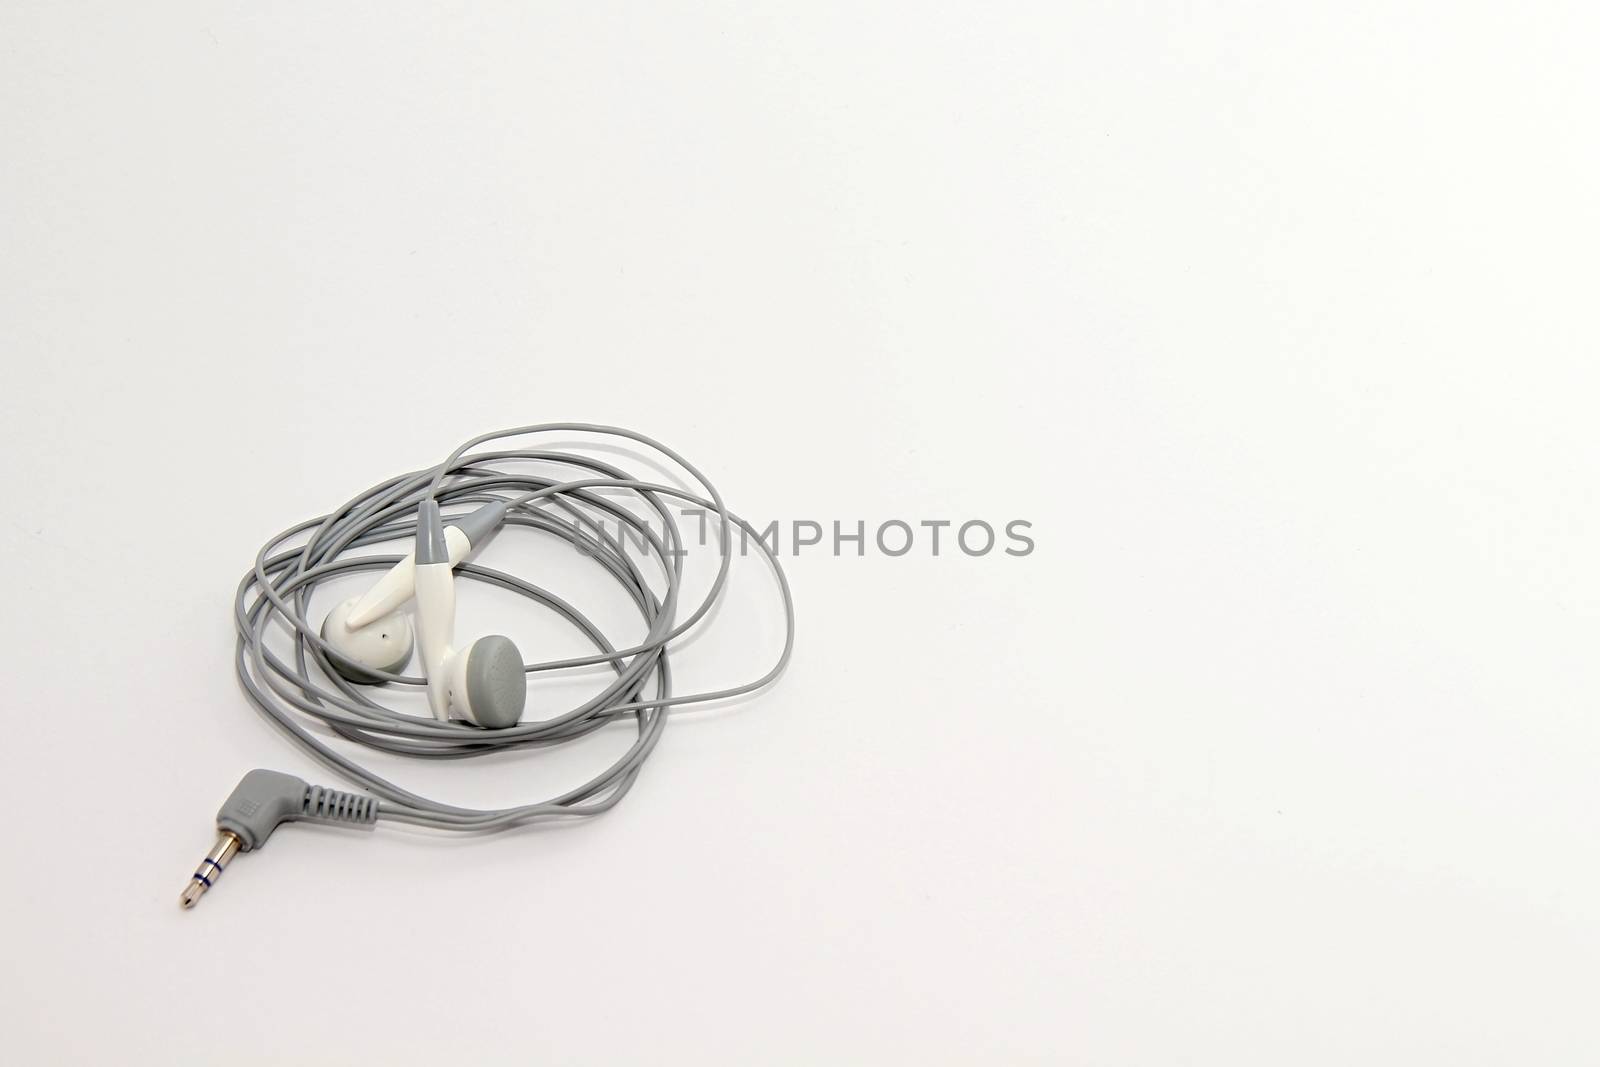 Photo of Cable Object perfectly fits to various presentation purposes.